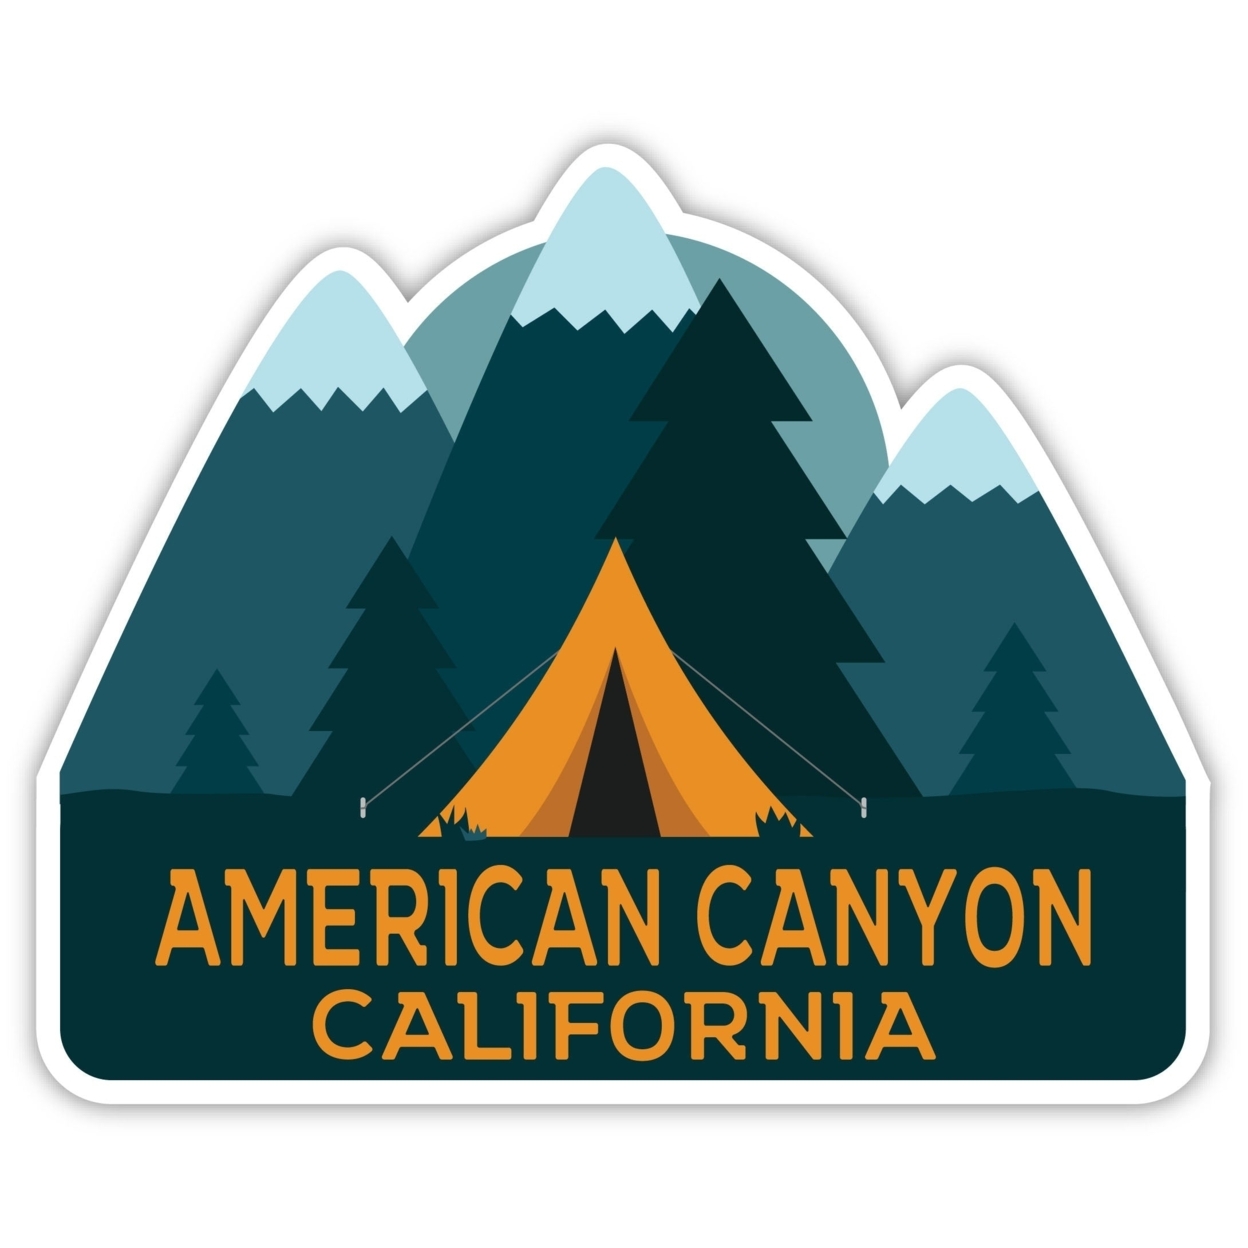 American Canyon California Souvenir Decorative Stickers (Choose Theme And Size) - 4-Pack, 12-Inch, Tent